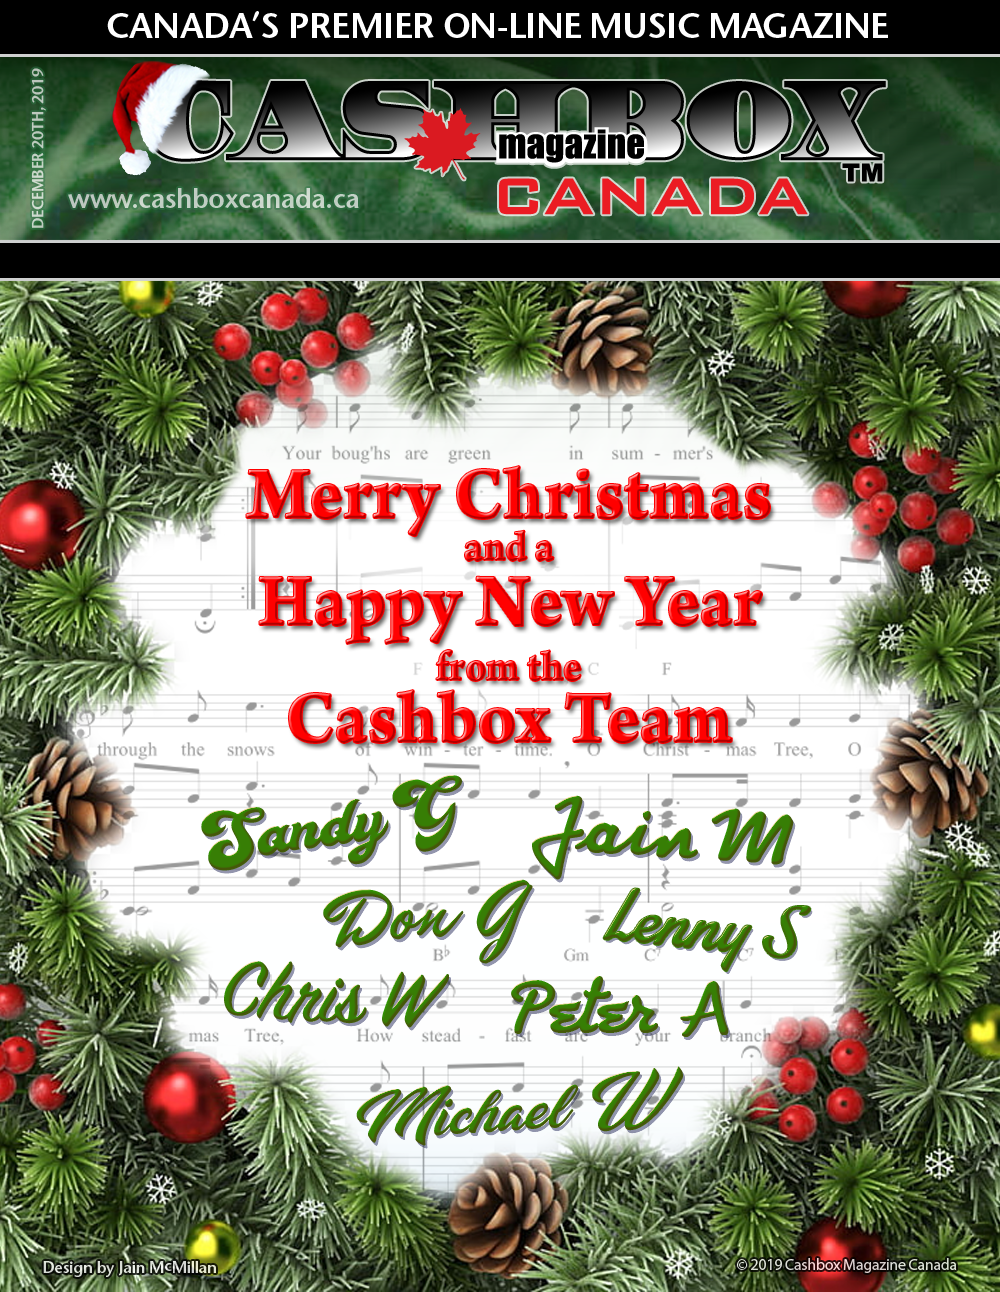 Season’s Greetings and Merry Christmas from Cashbox